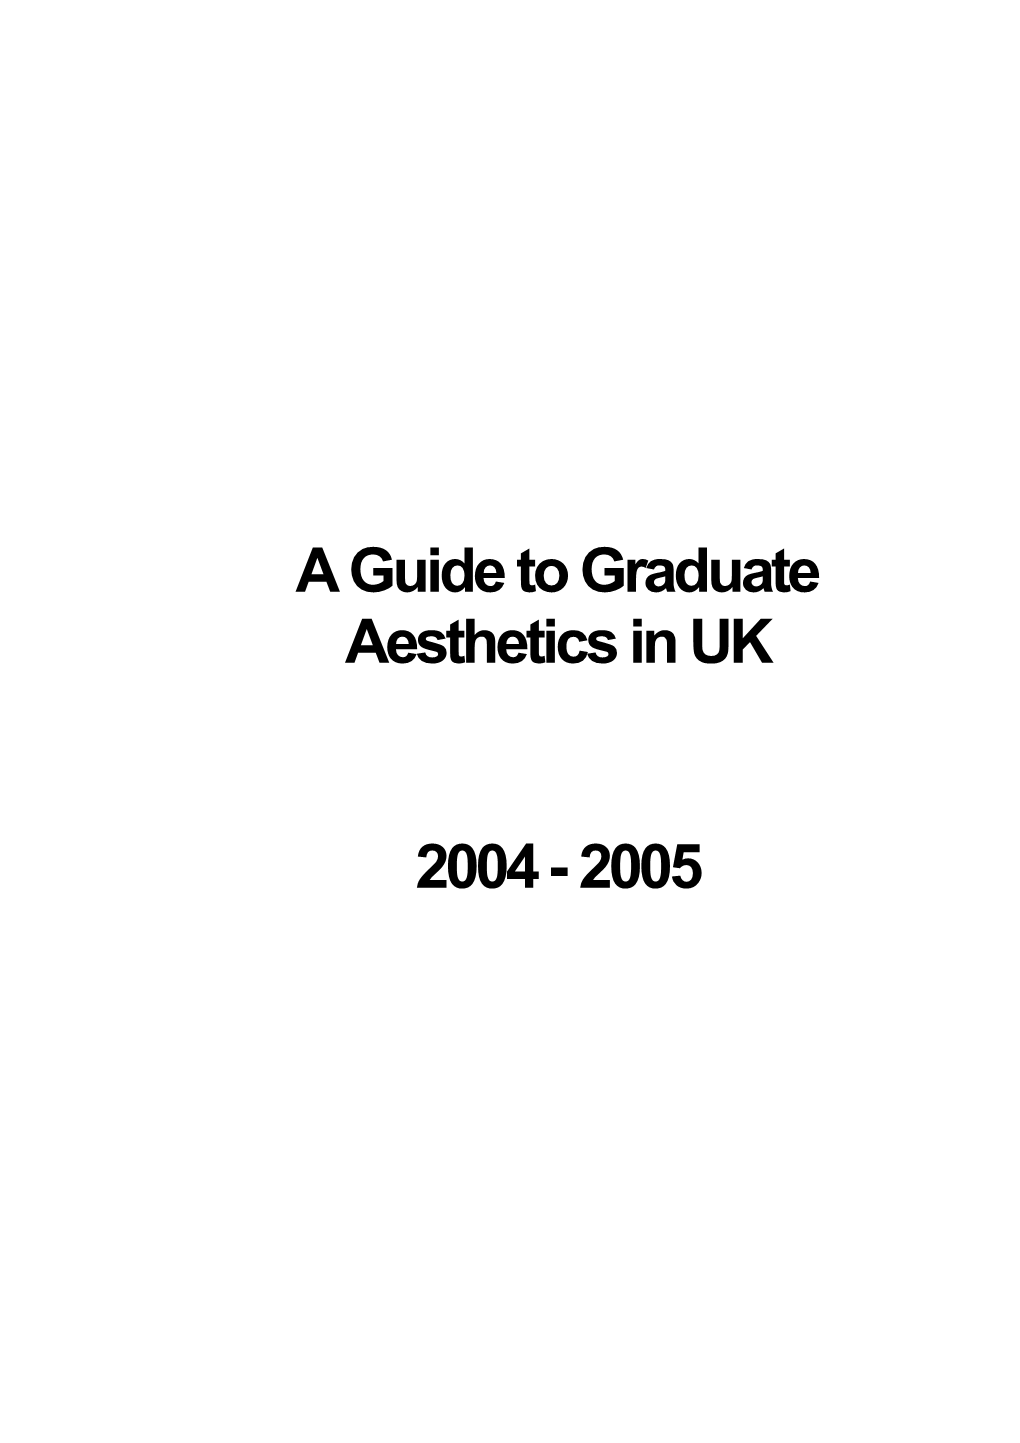 A Guide to Graduate Aesthetics in UK 2004